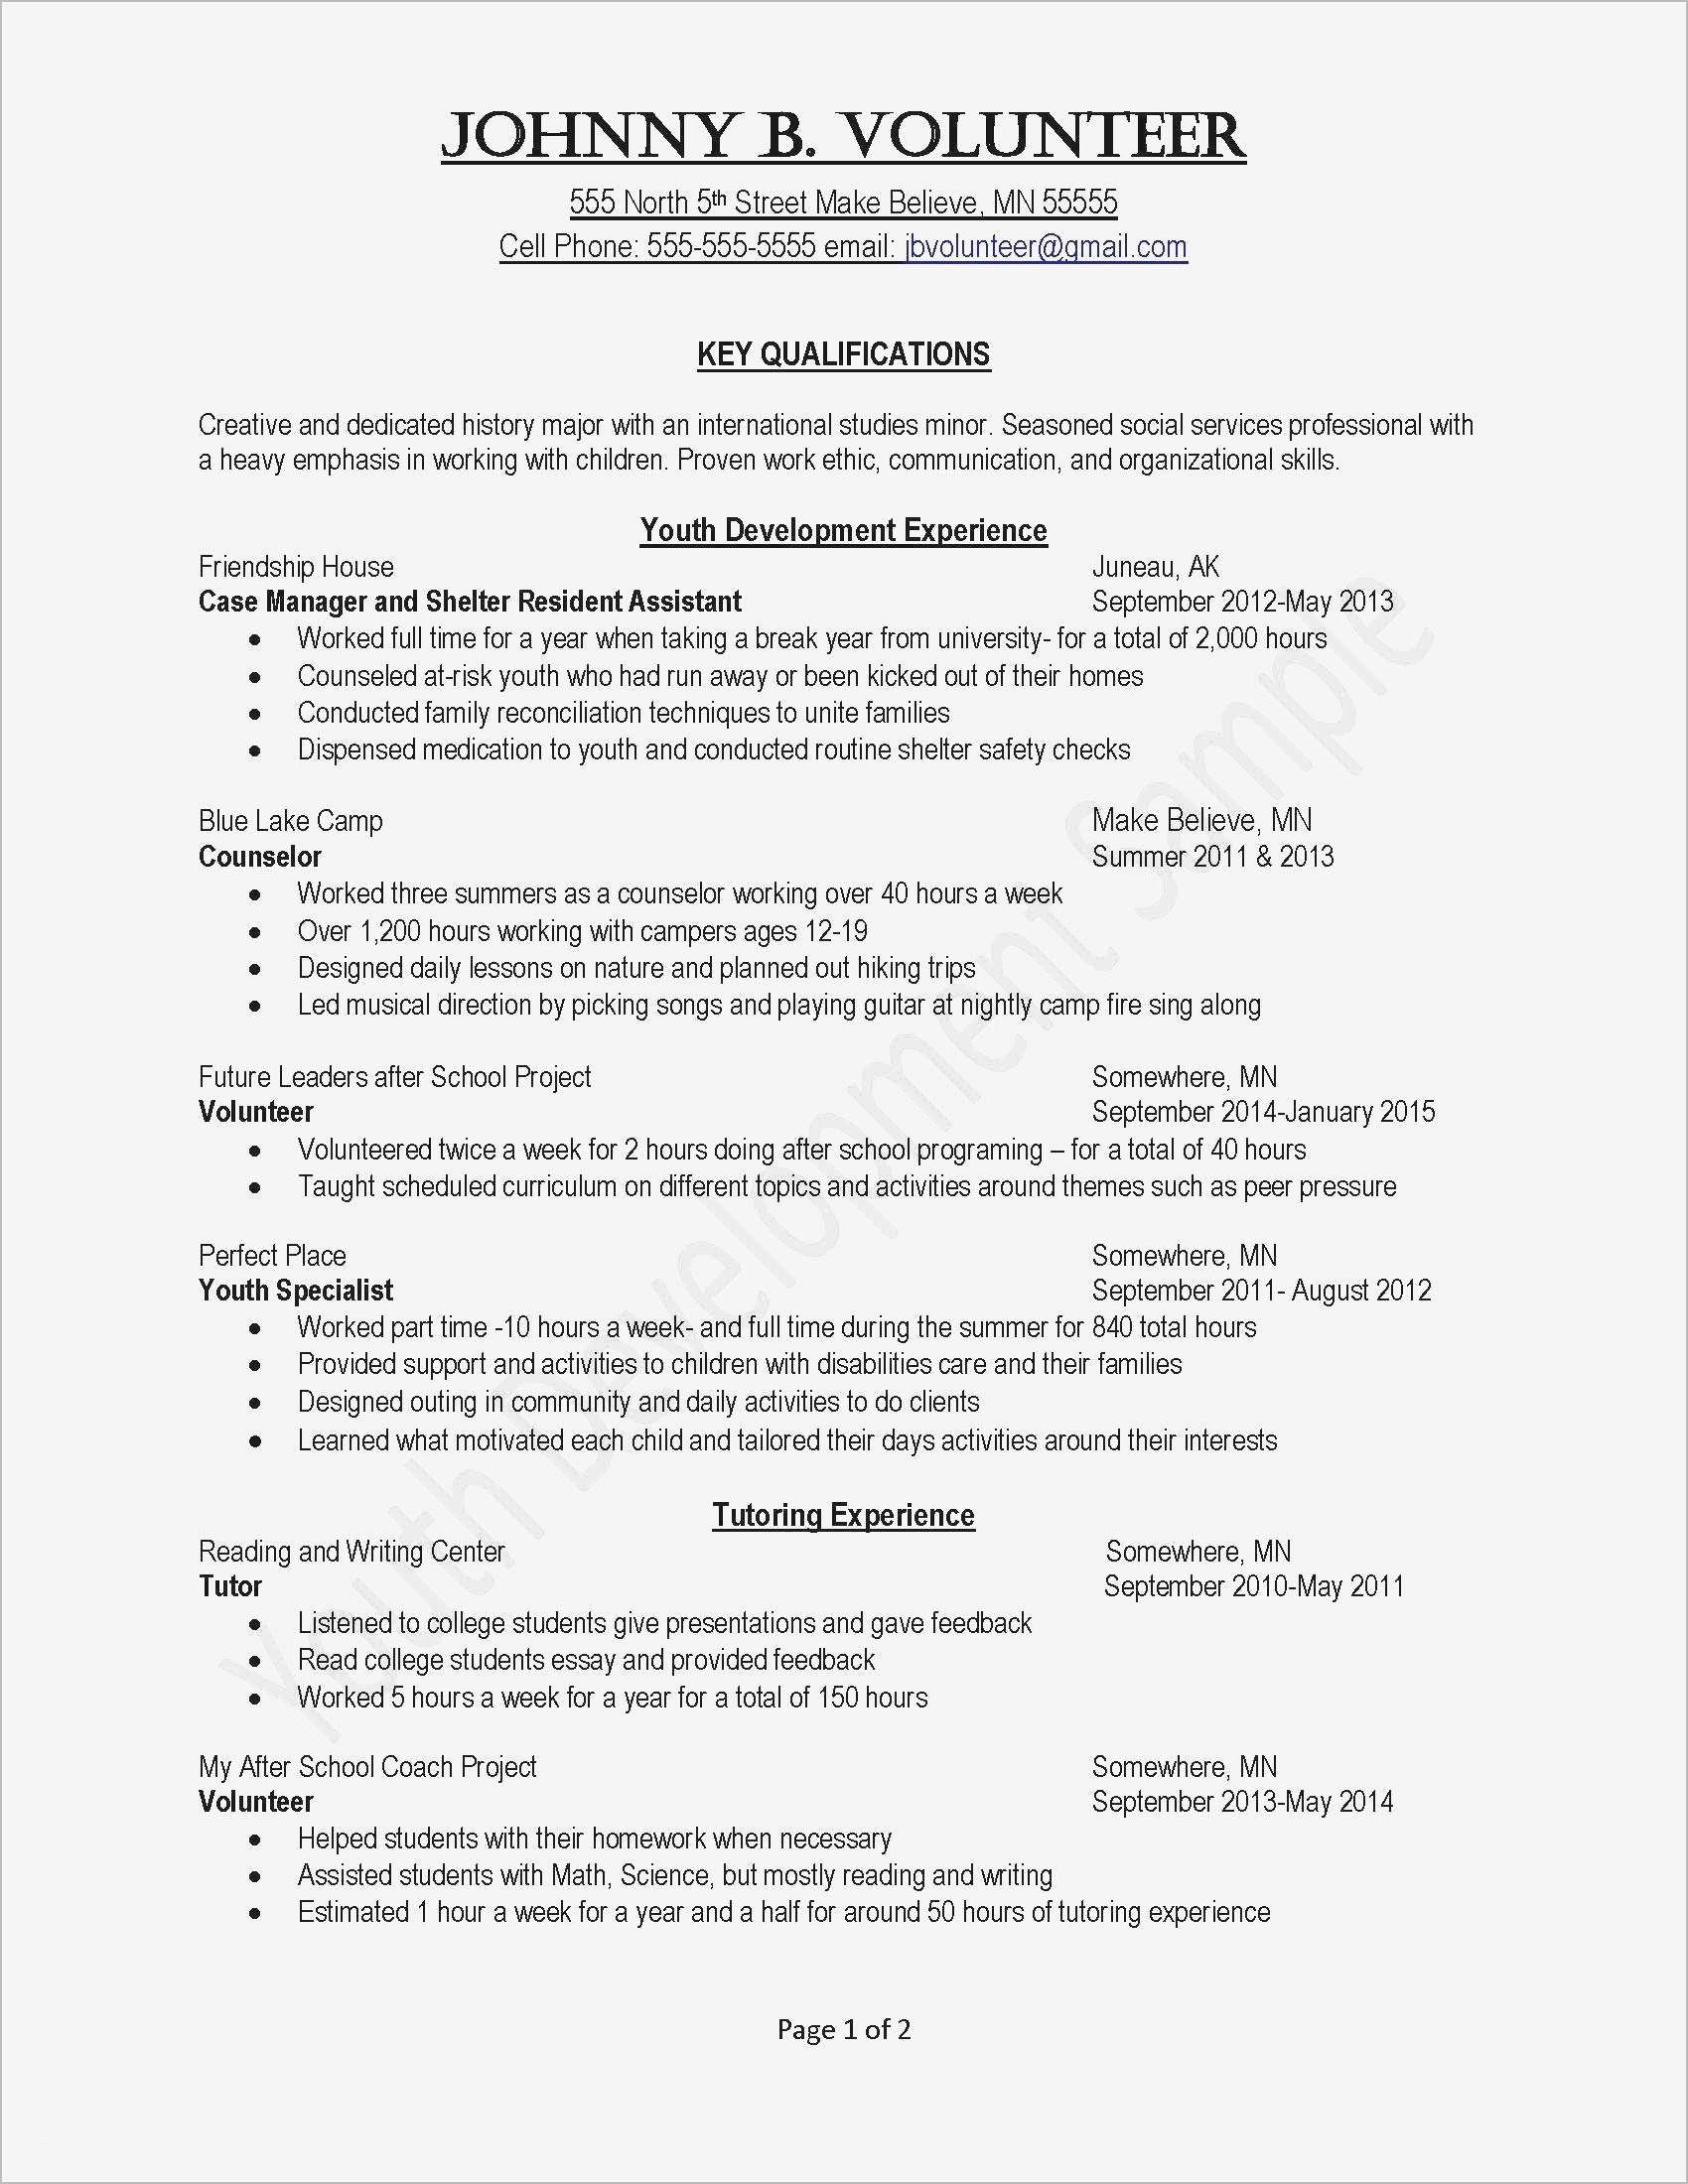 professional cover letter template free example-Free Cover Letter And Resume Templates Best Job Fer Letter Template Us Copy Od Consultant Cover Letter Fungram 11-i